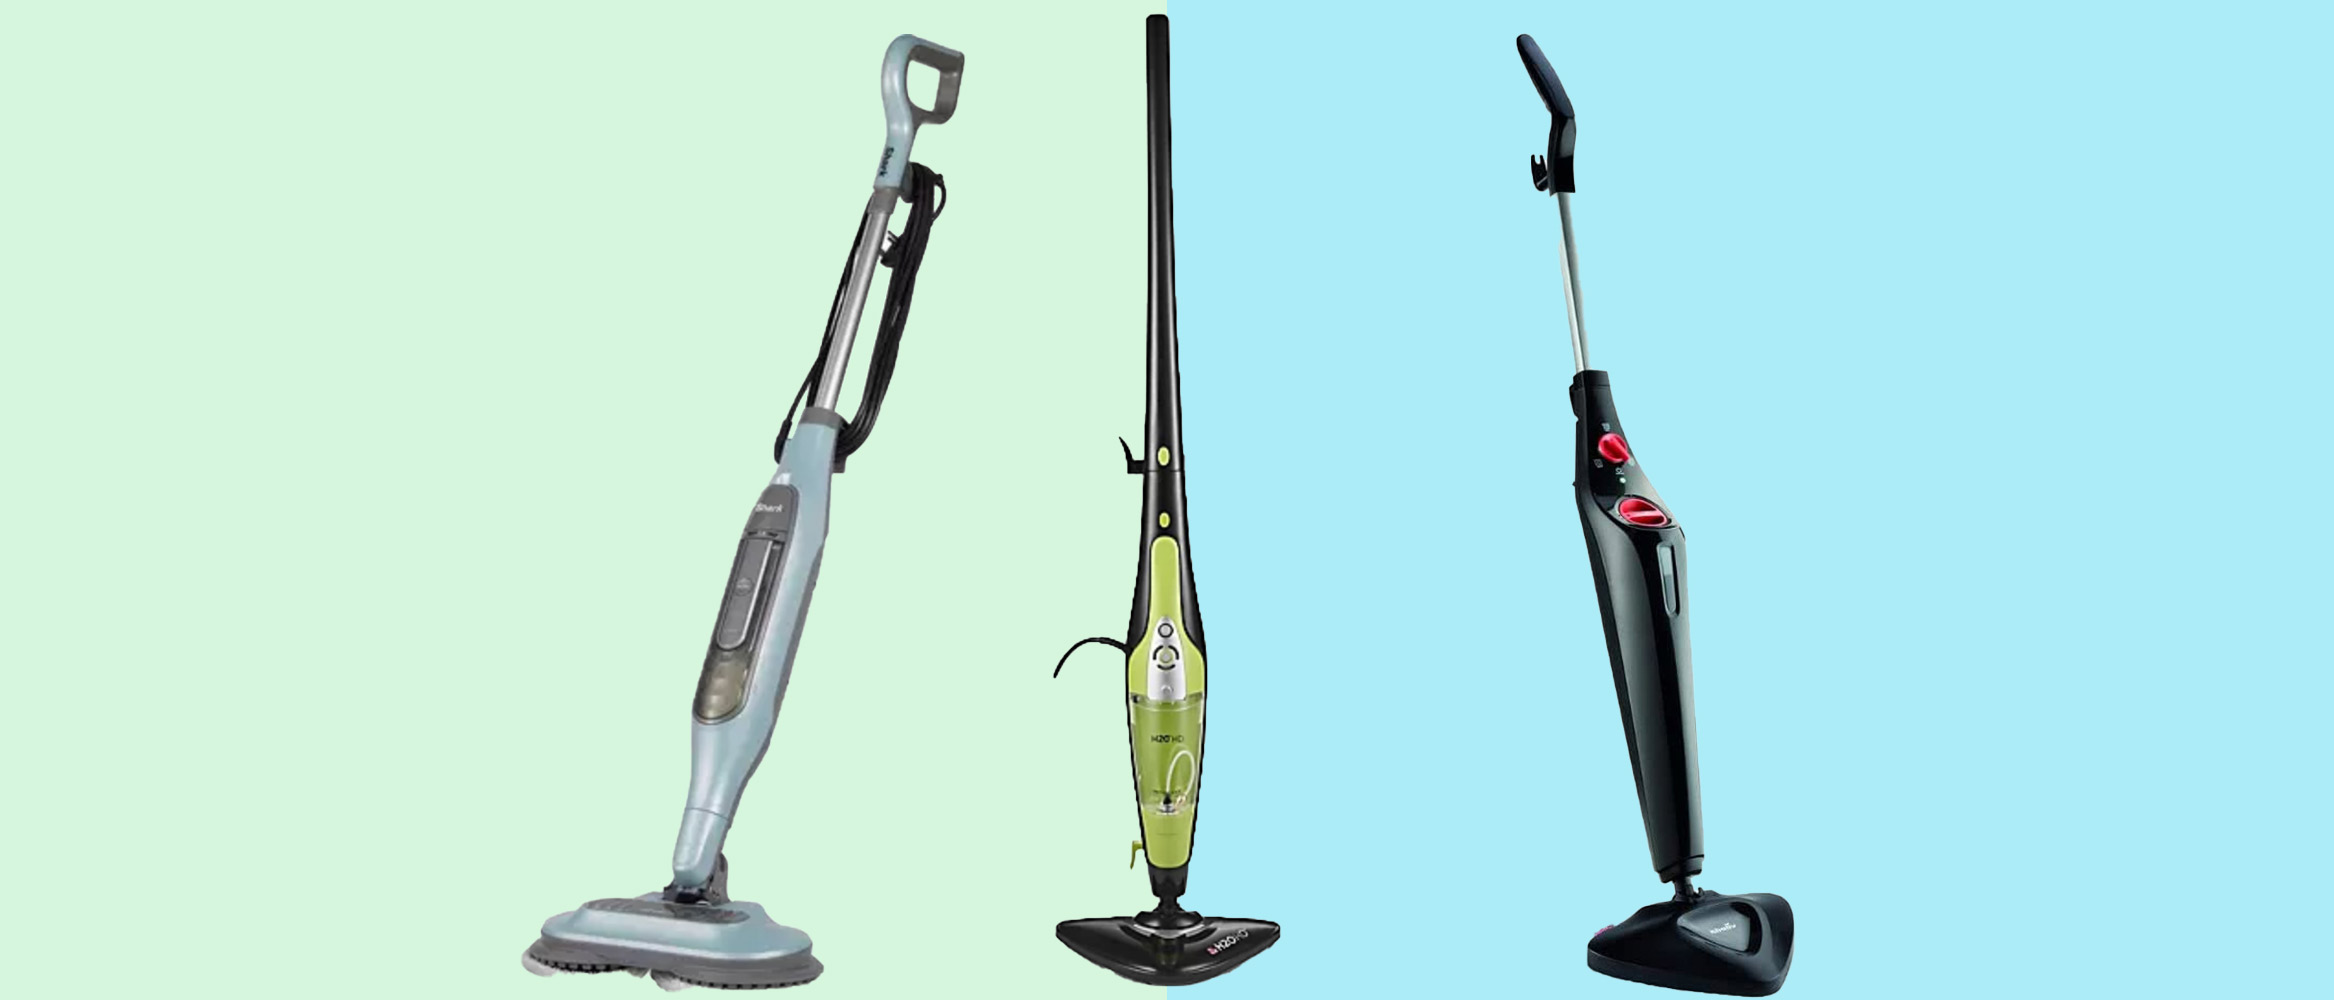 Best Handheld Steam Cleaners 2022: Portable Steam Mops and Cleaners